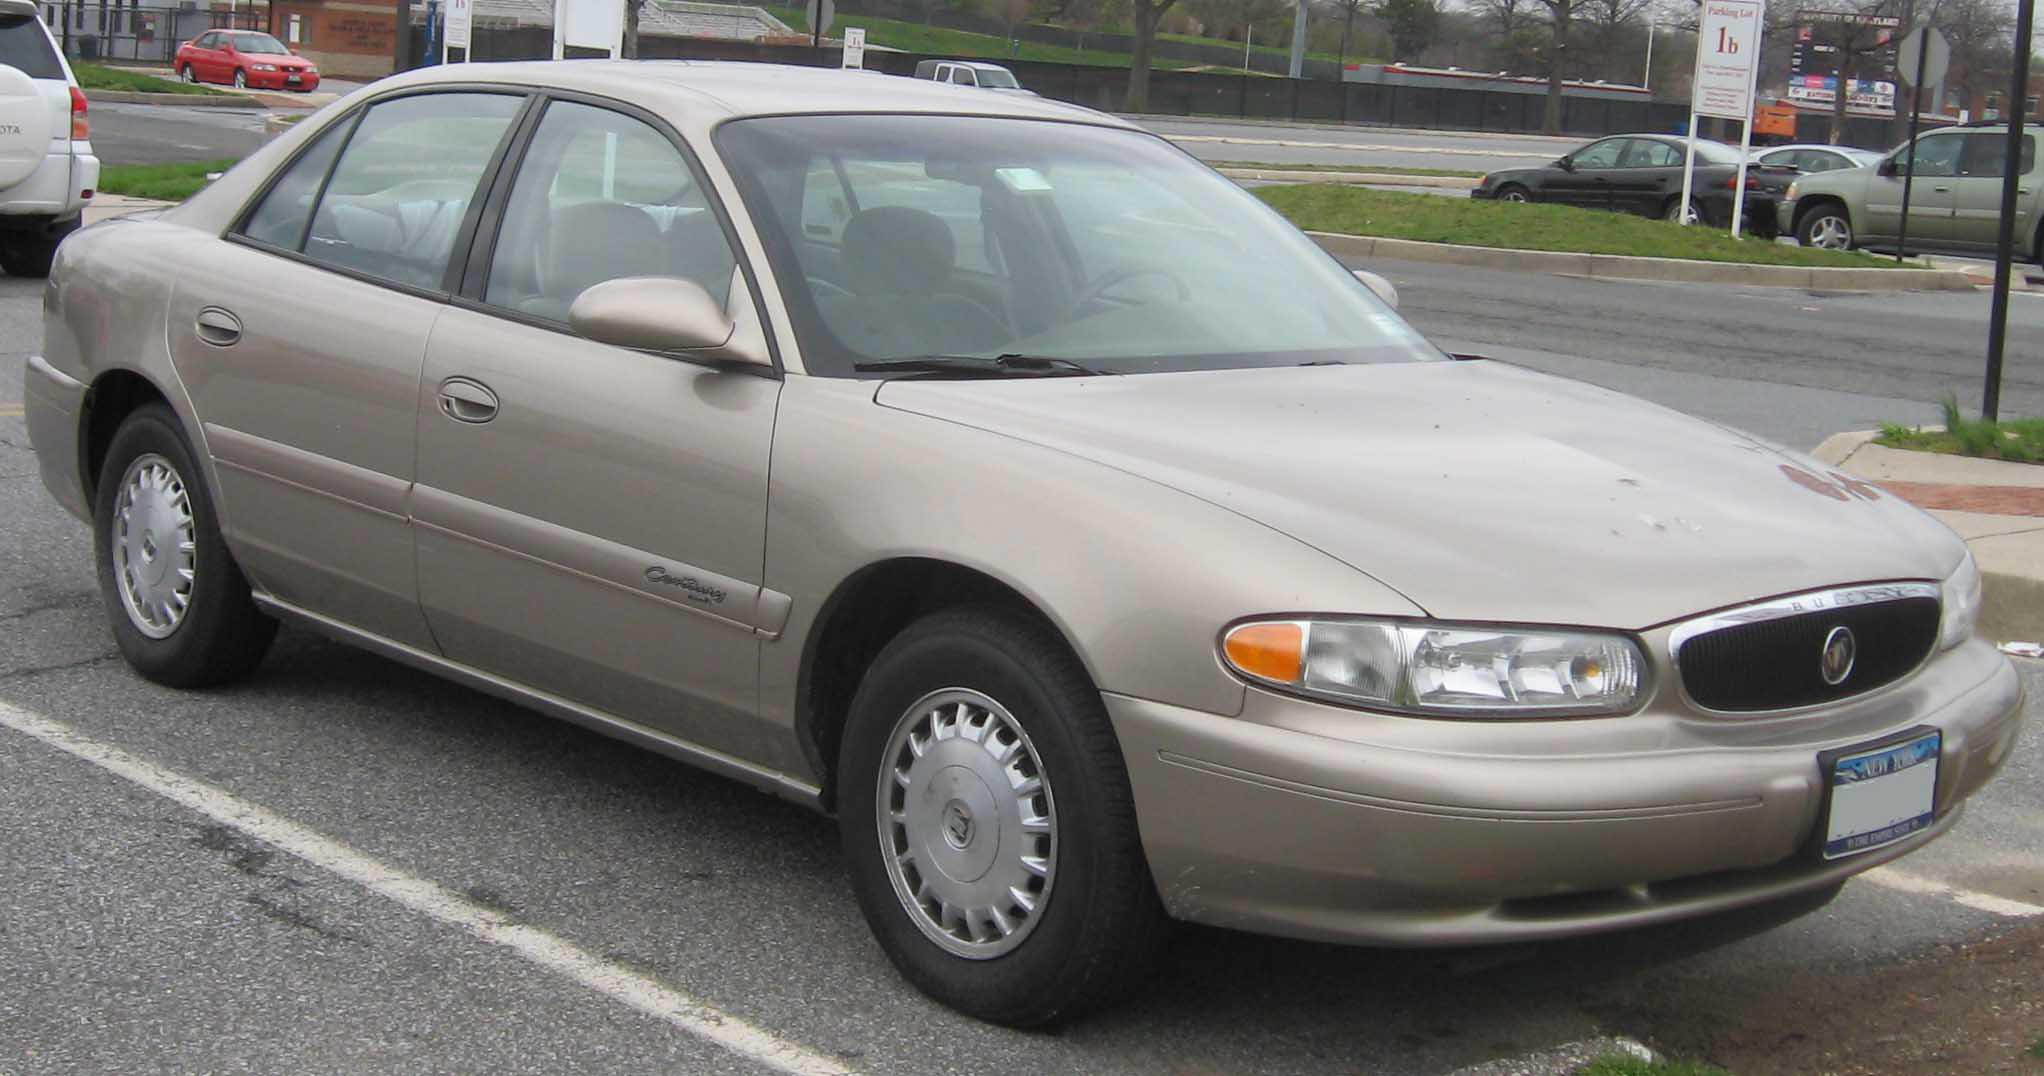 1999 Buick Century: The official car of defaulting on a payday loan :  r/regularcarreviews